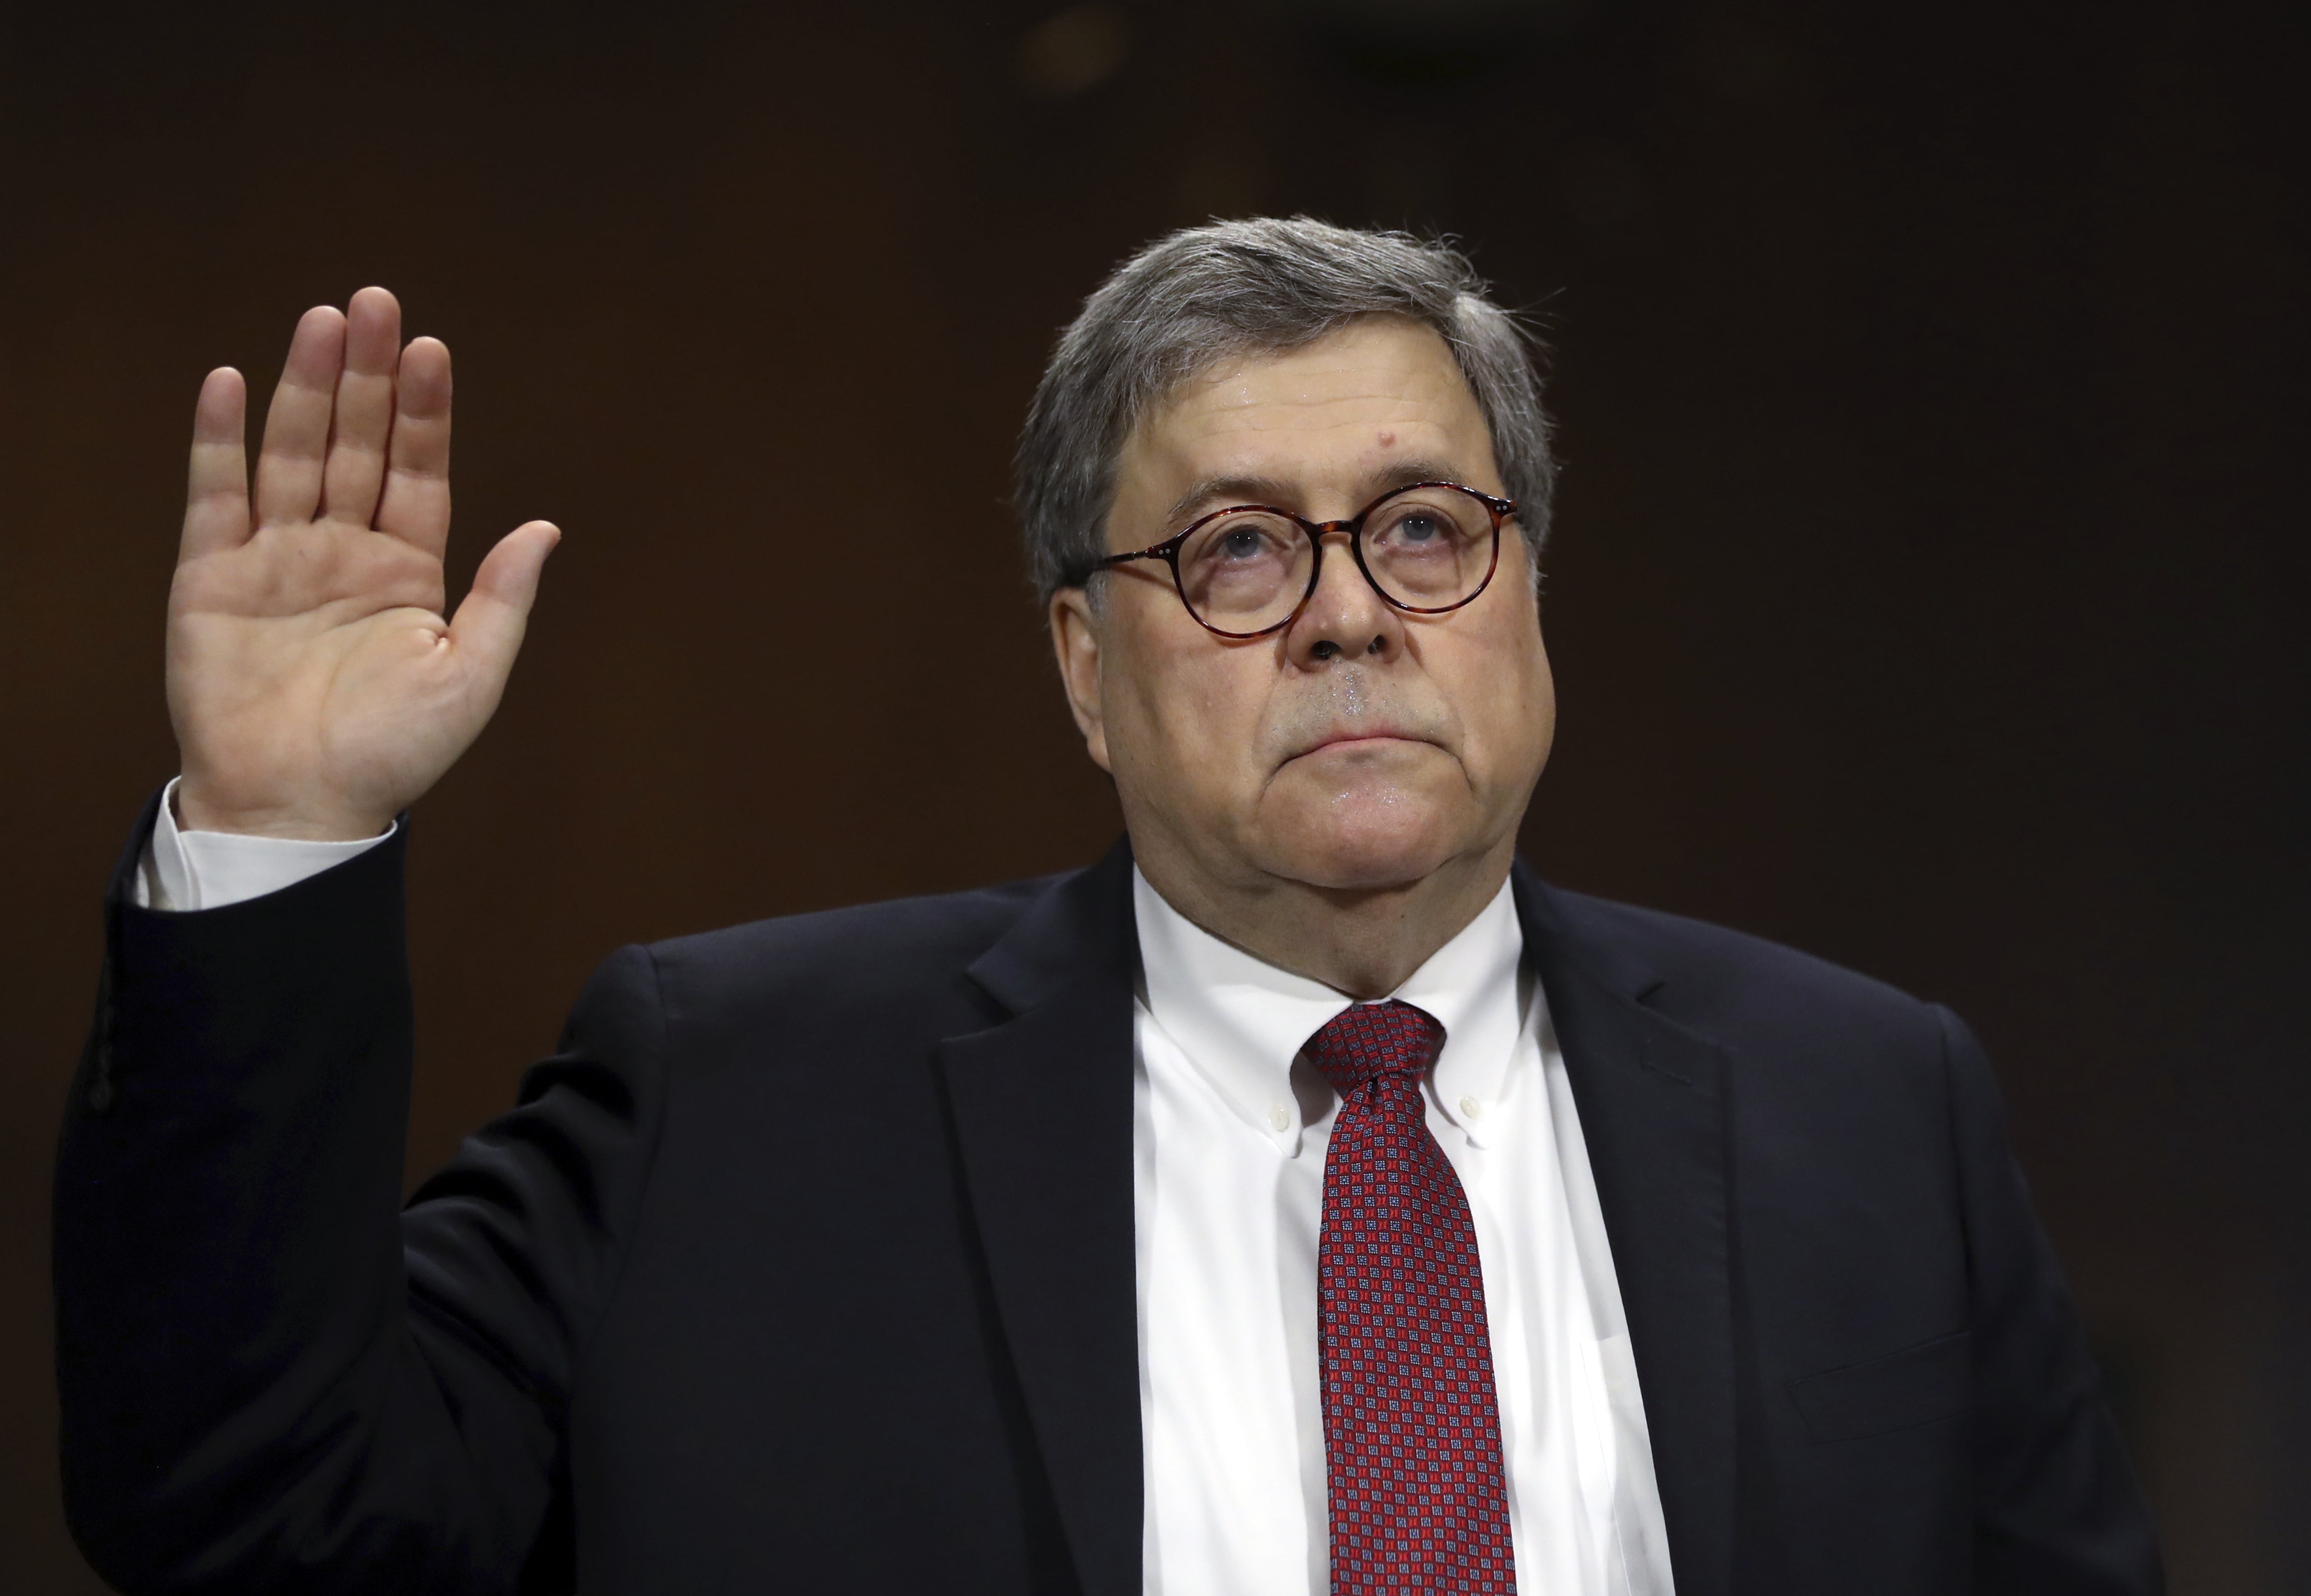 Attorney General William Barr is sworn in to testify before the Senate Judiciary Committee hearing on Capitol Hill in Washington, Wednesday, May 1, 2019, on the Mueller Report.